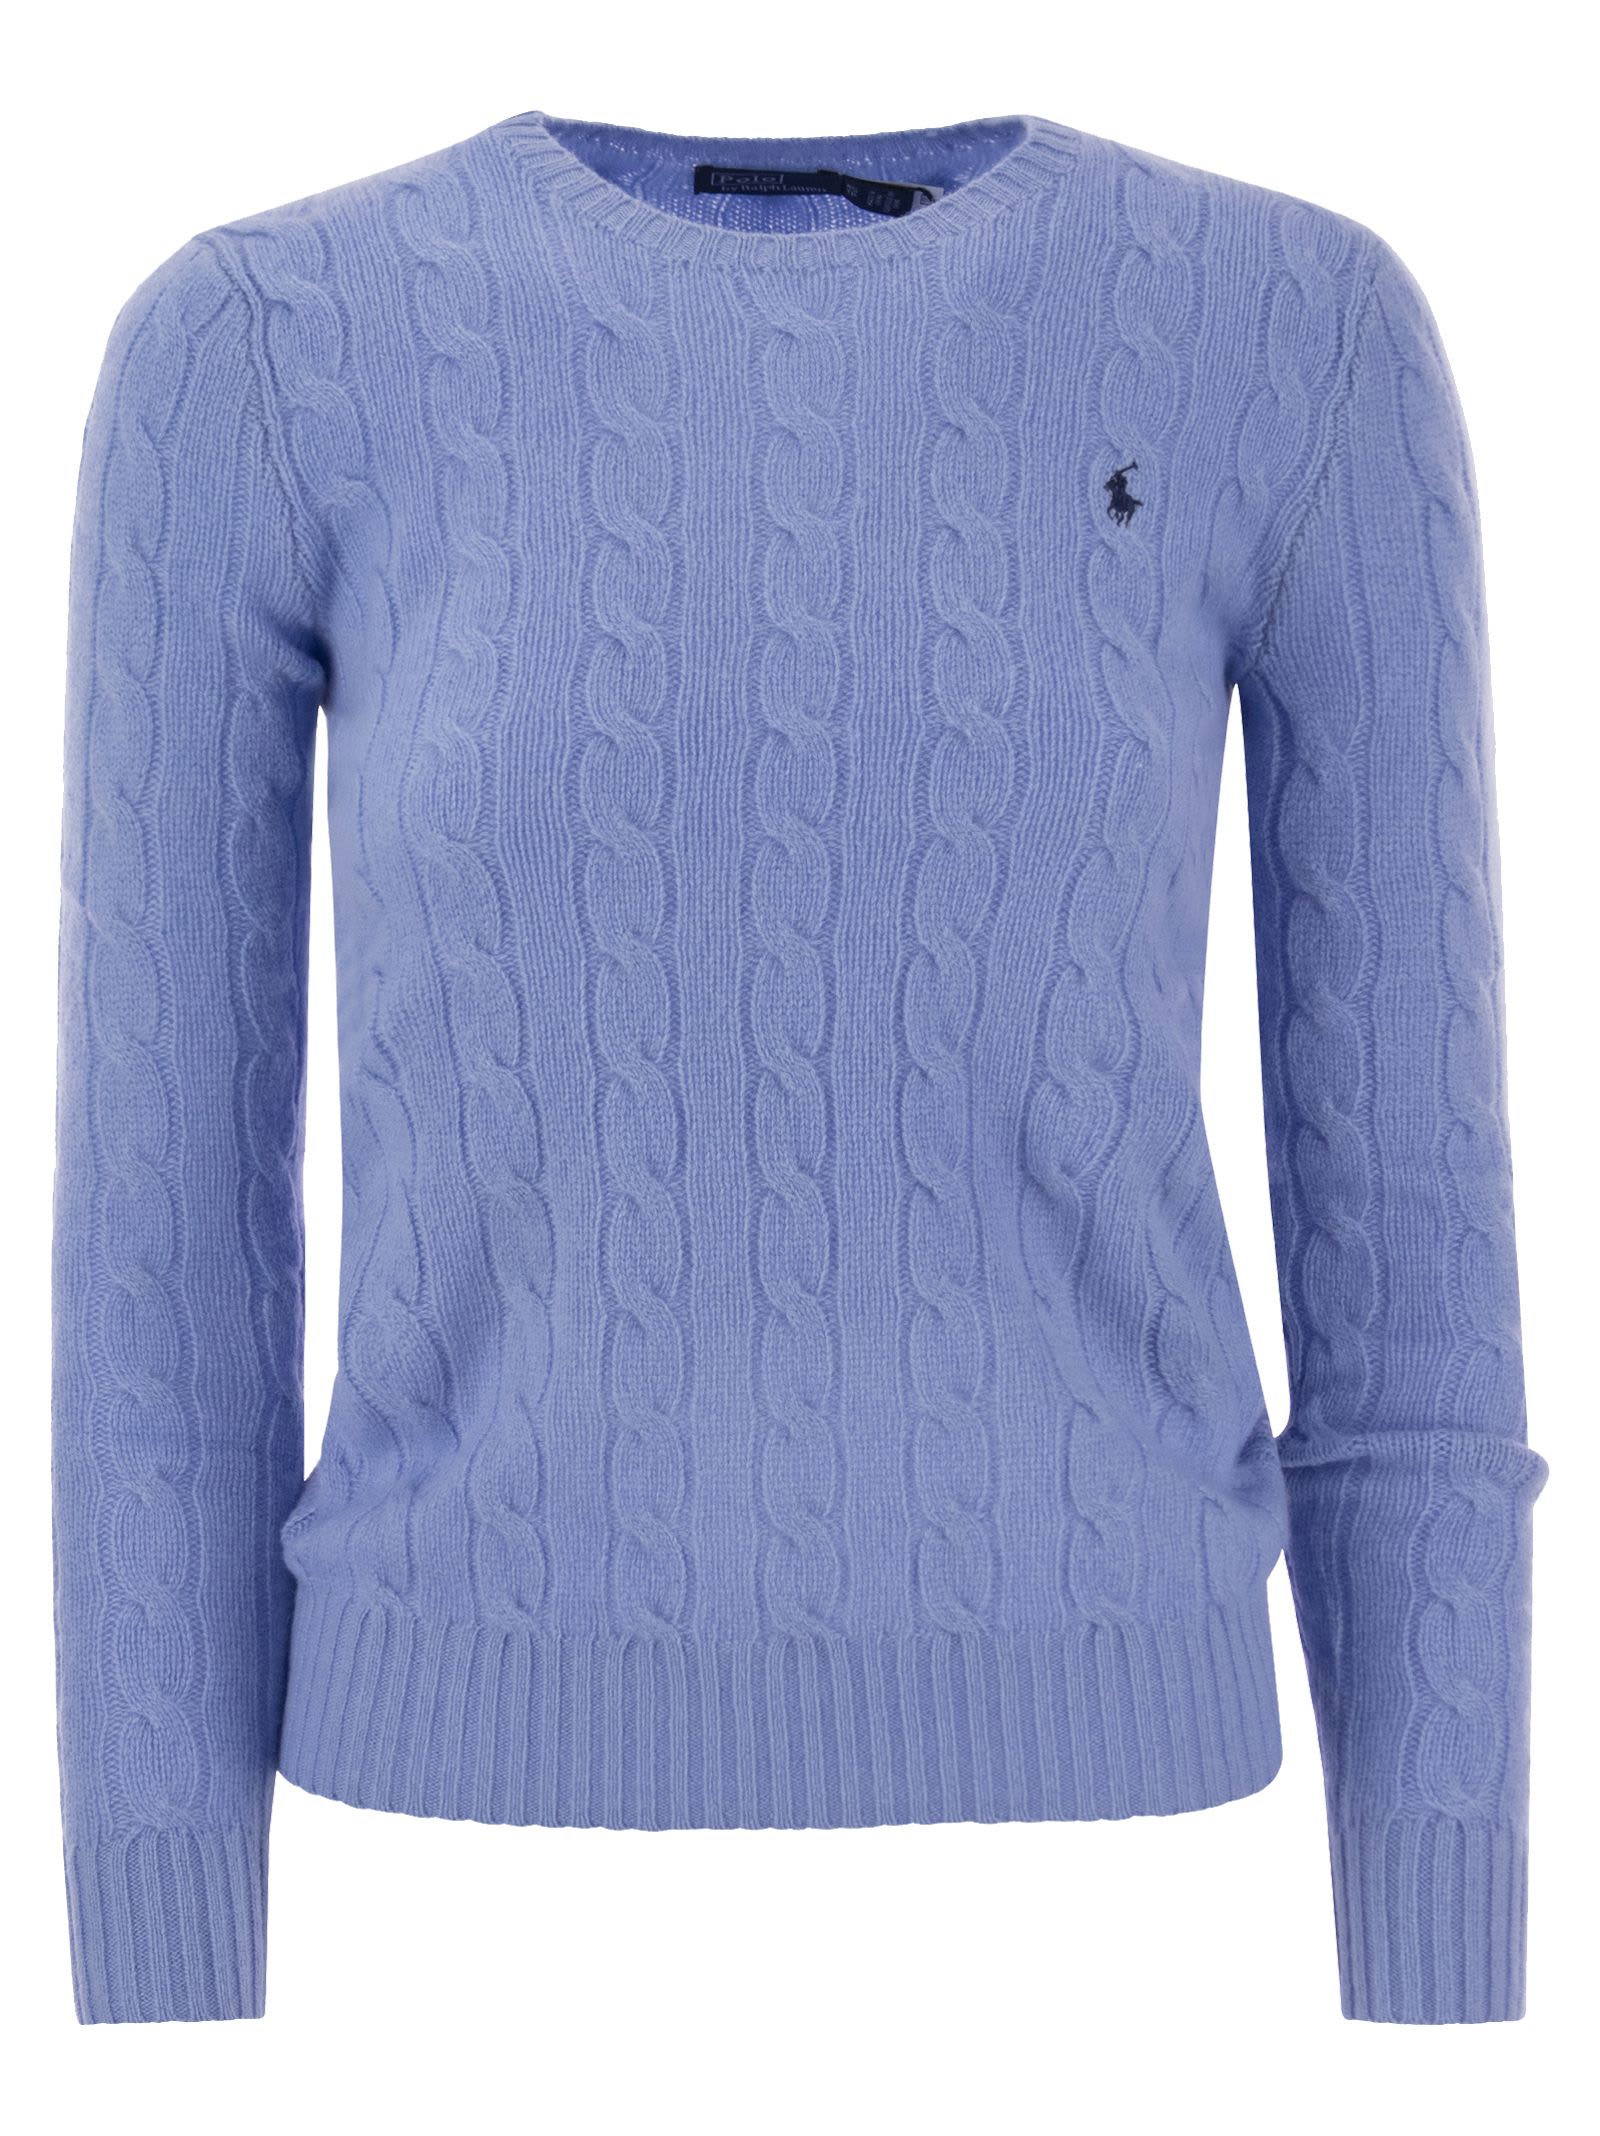 POLO RALPH LAUREN WOOL AND CASHMERE CABLE-KNIT SWEATER